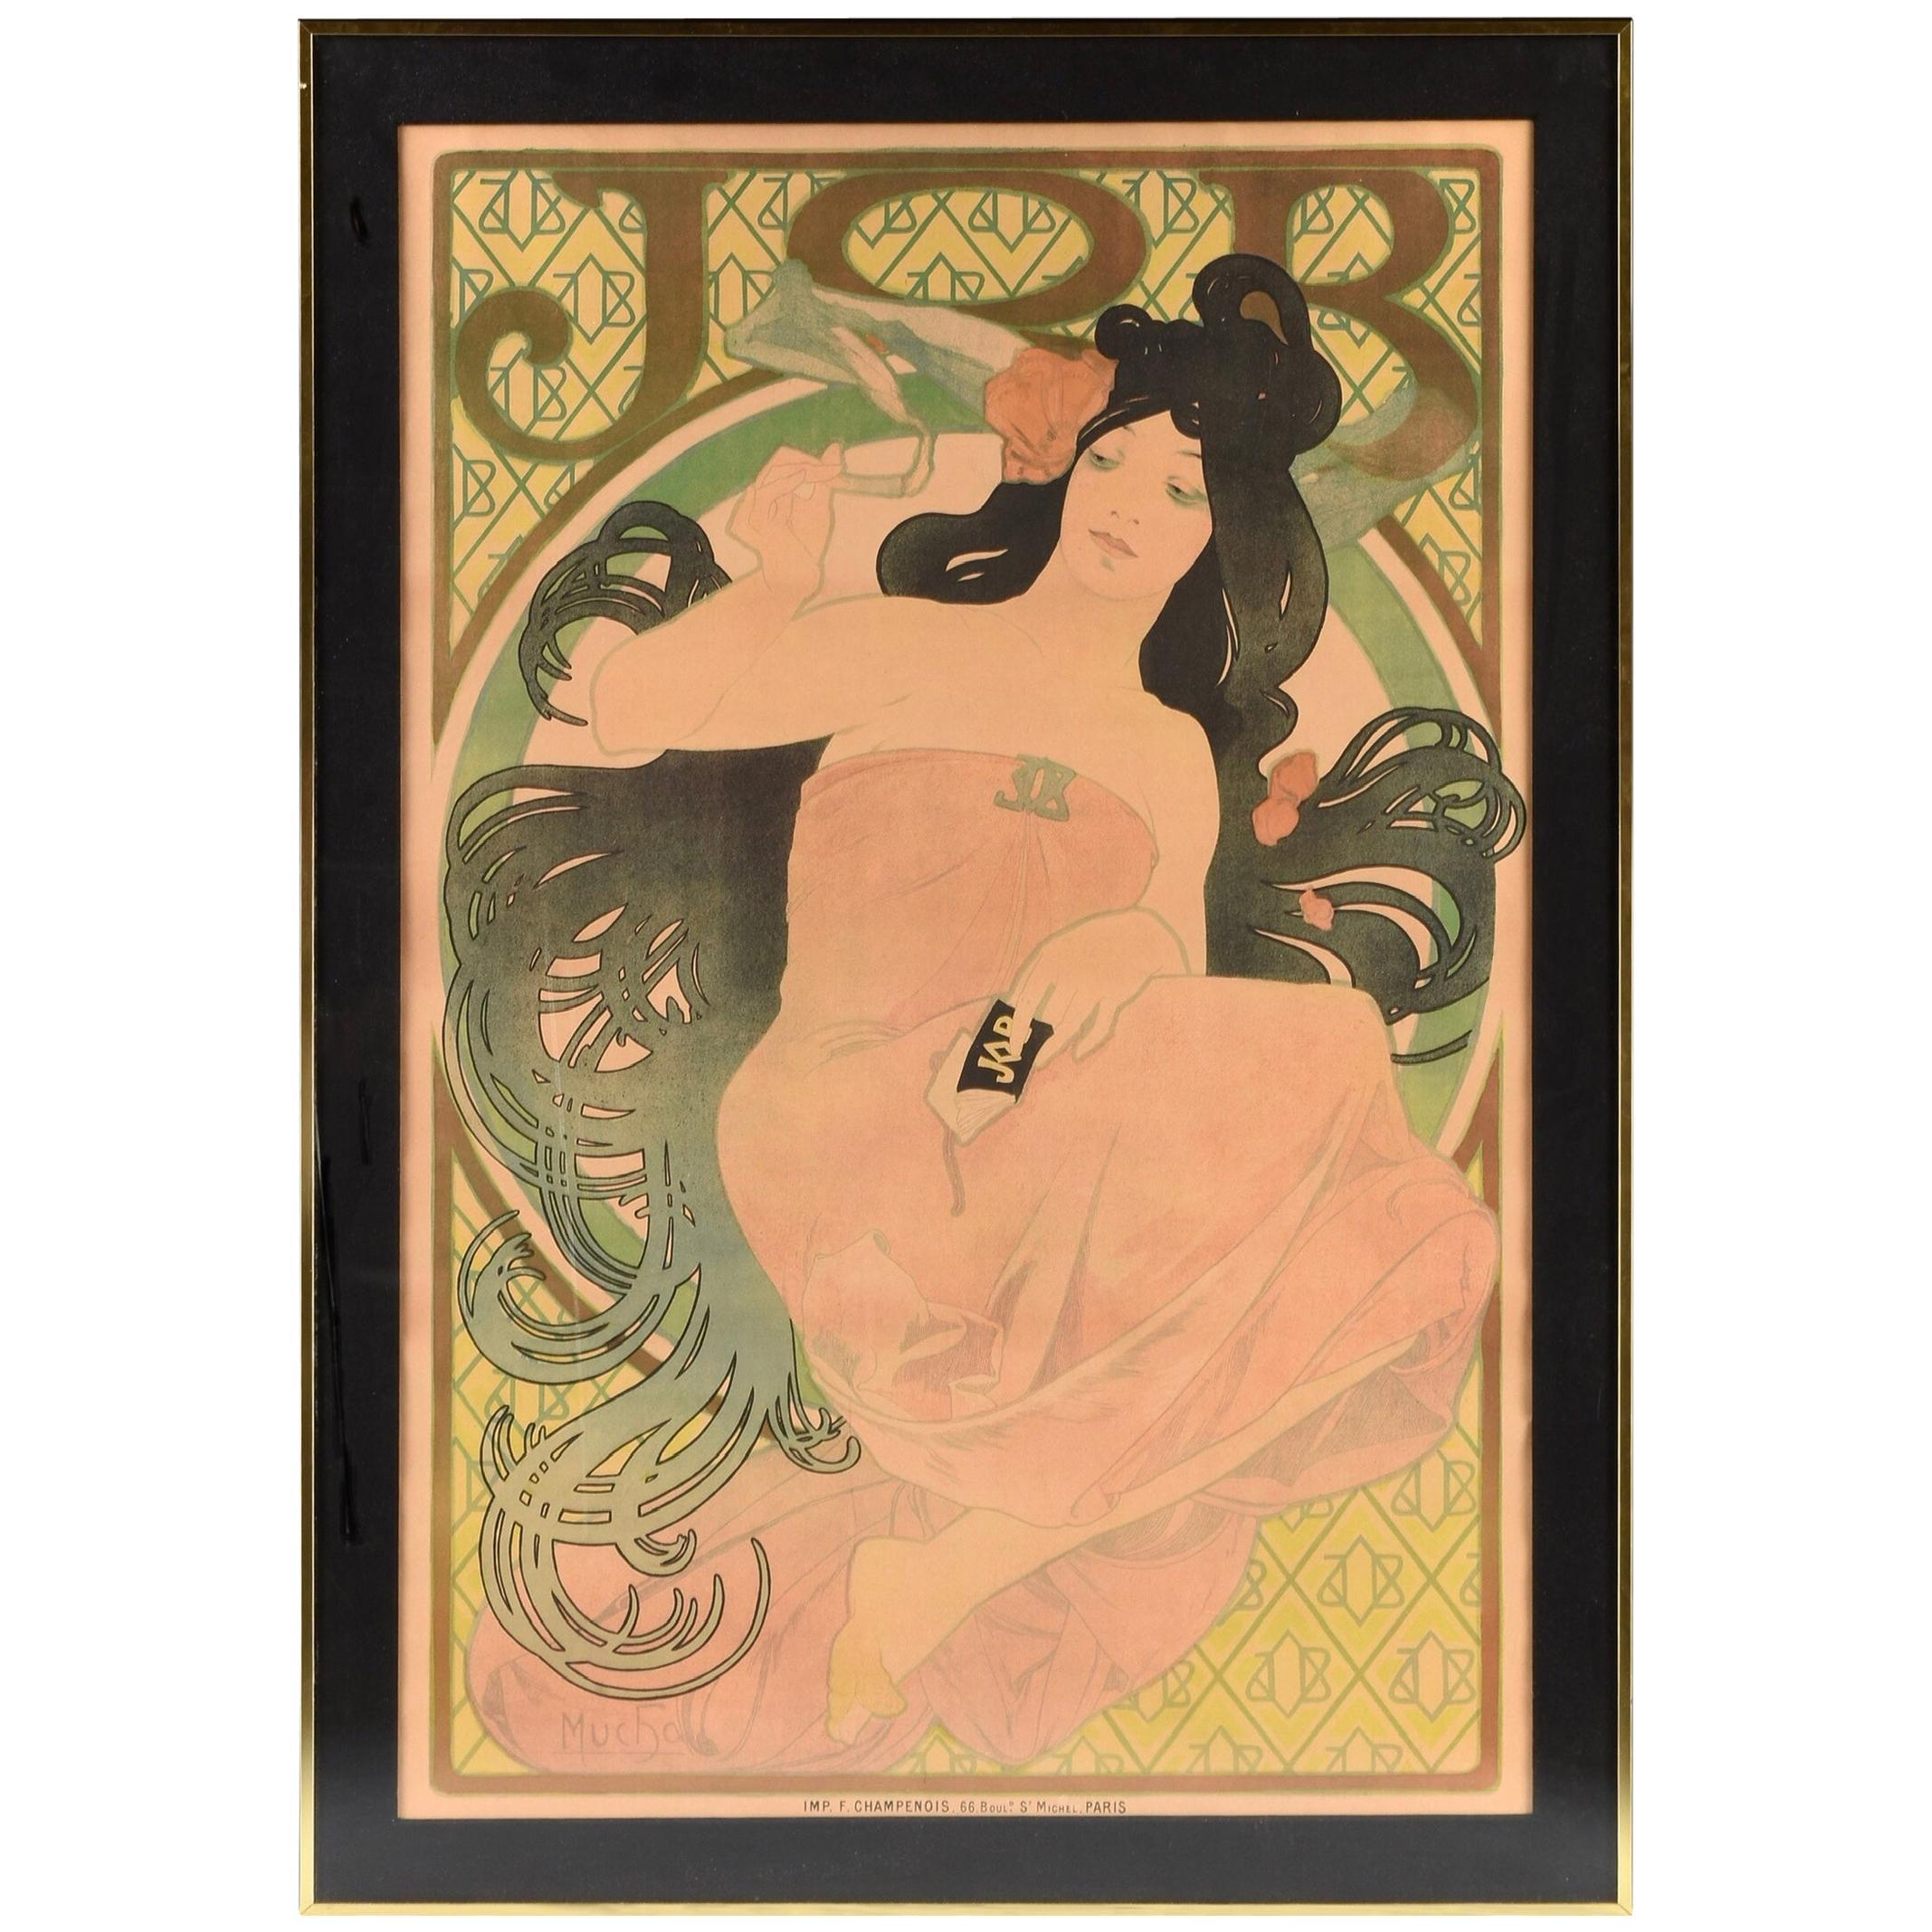 Alphonse Mucha 1898 "JOB" poster. Printed by: “Imp. F Champenois 66 Boul, St Michel, Paris” in 1898

Very good (A-) condition with toning throughout and less under matting. 

Linen backed with contemporary frame under plexiglass ready to hang.
